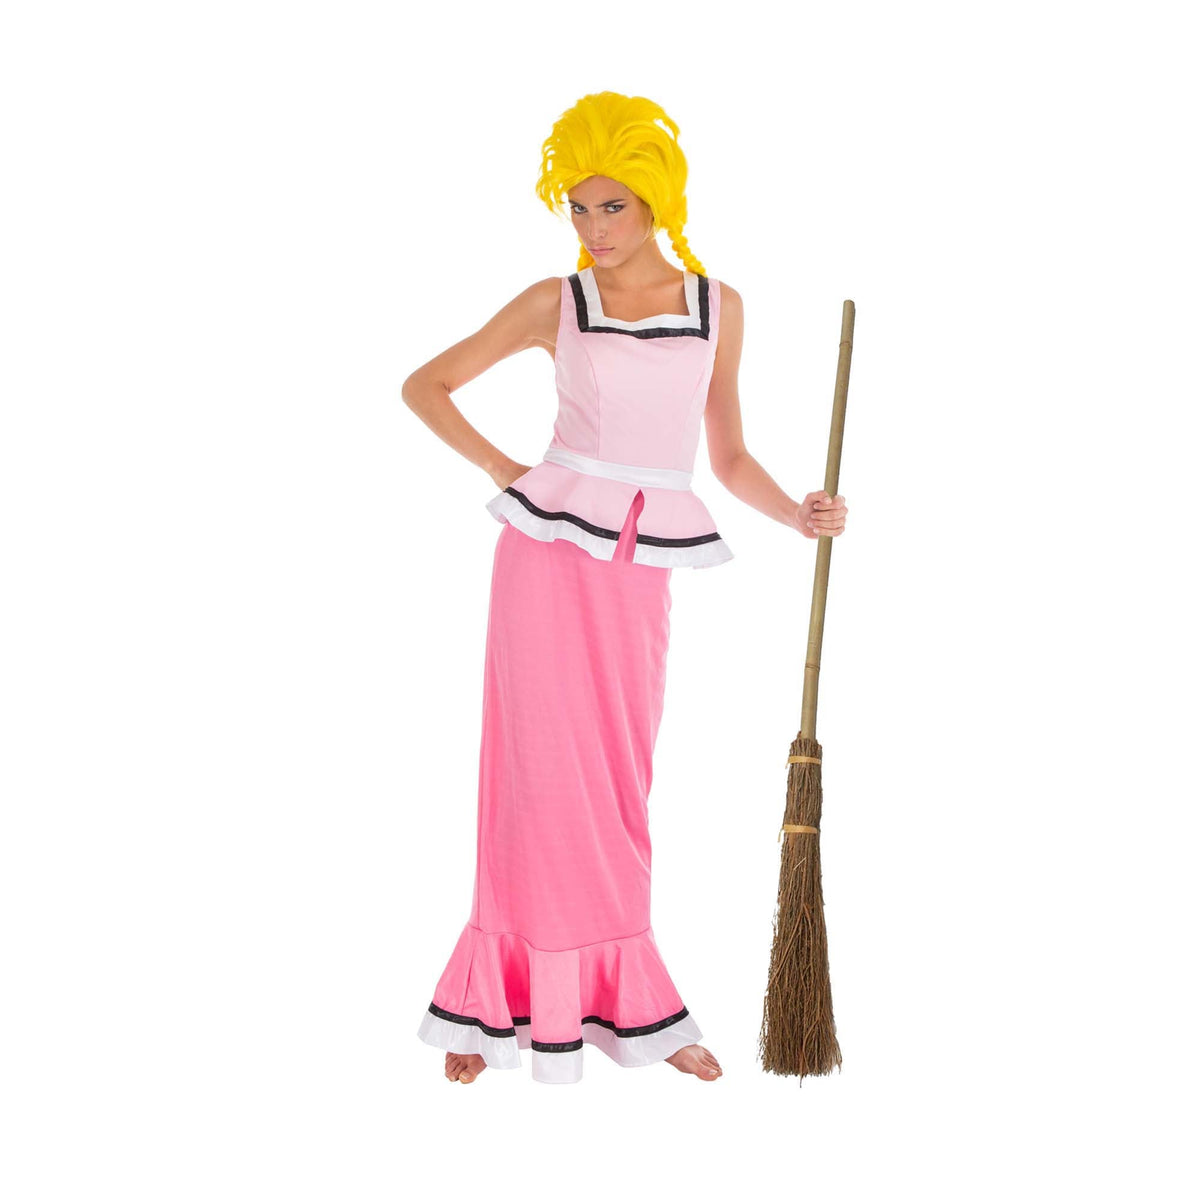 CHAKS Costumes Bonemine Costume for Adults, Asterix and Obelix, Pink Top and Skirt